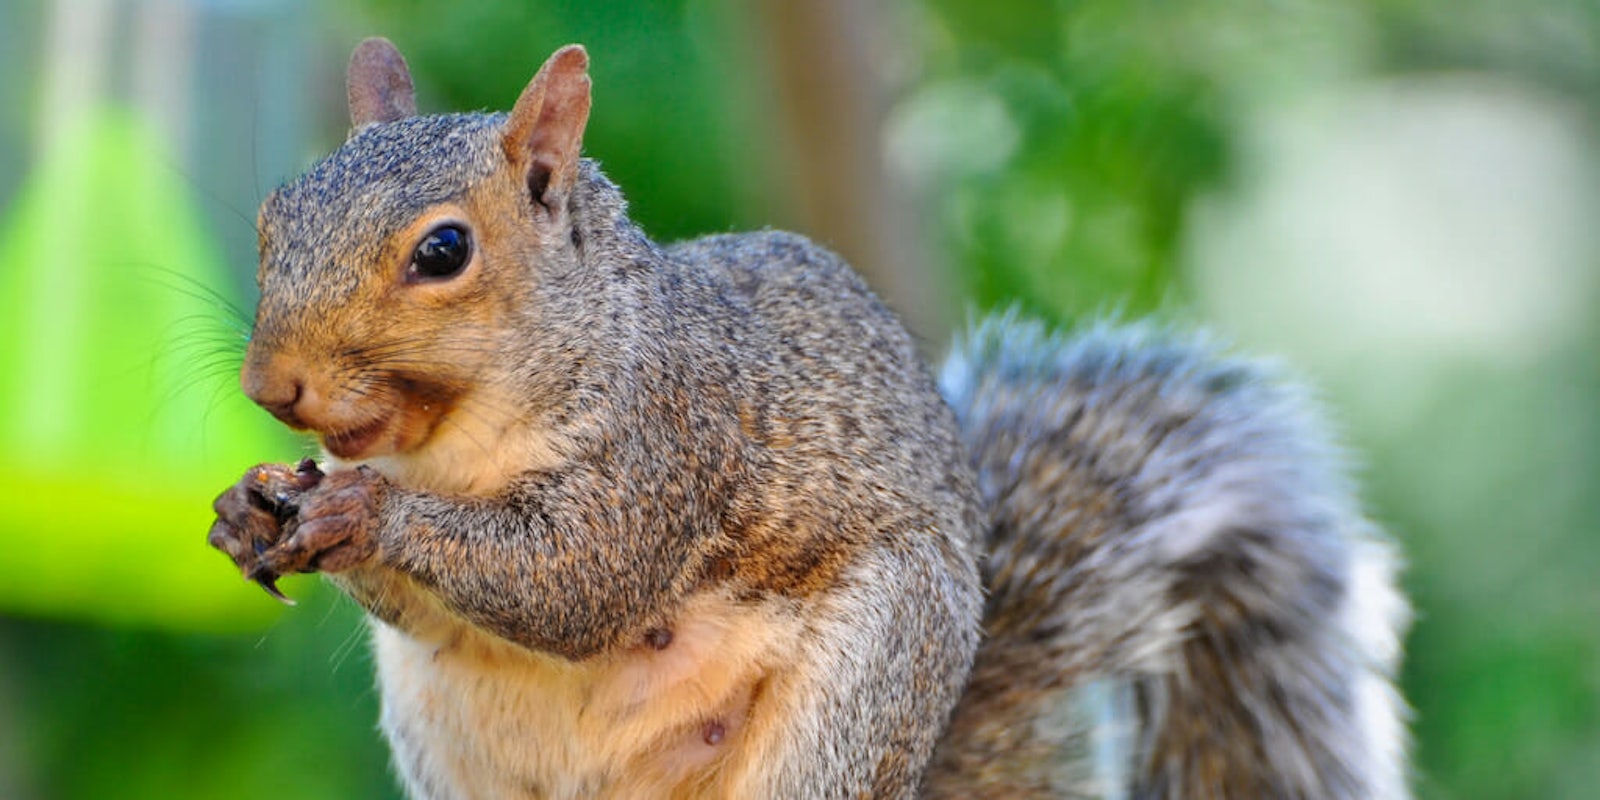 Frontier Flights booted a passenger and her emotional support squirrel.